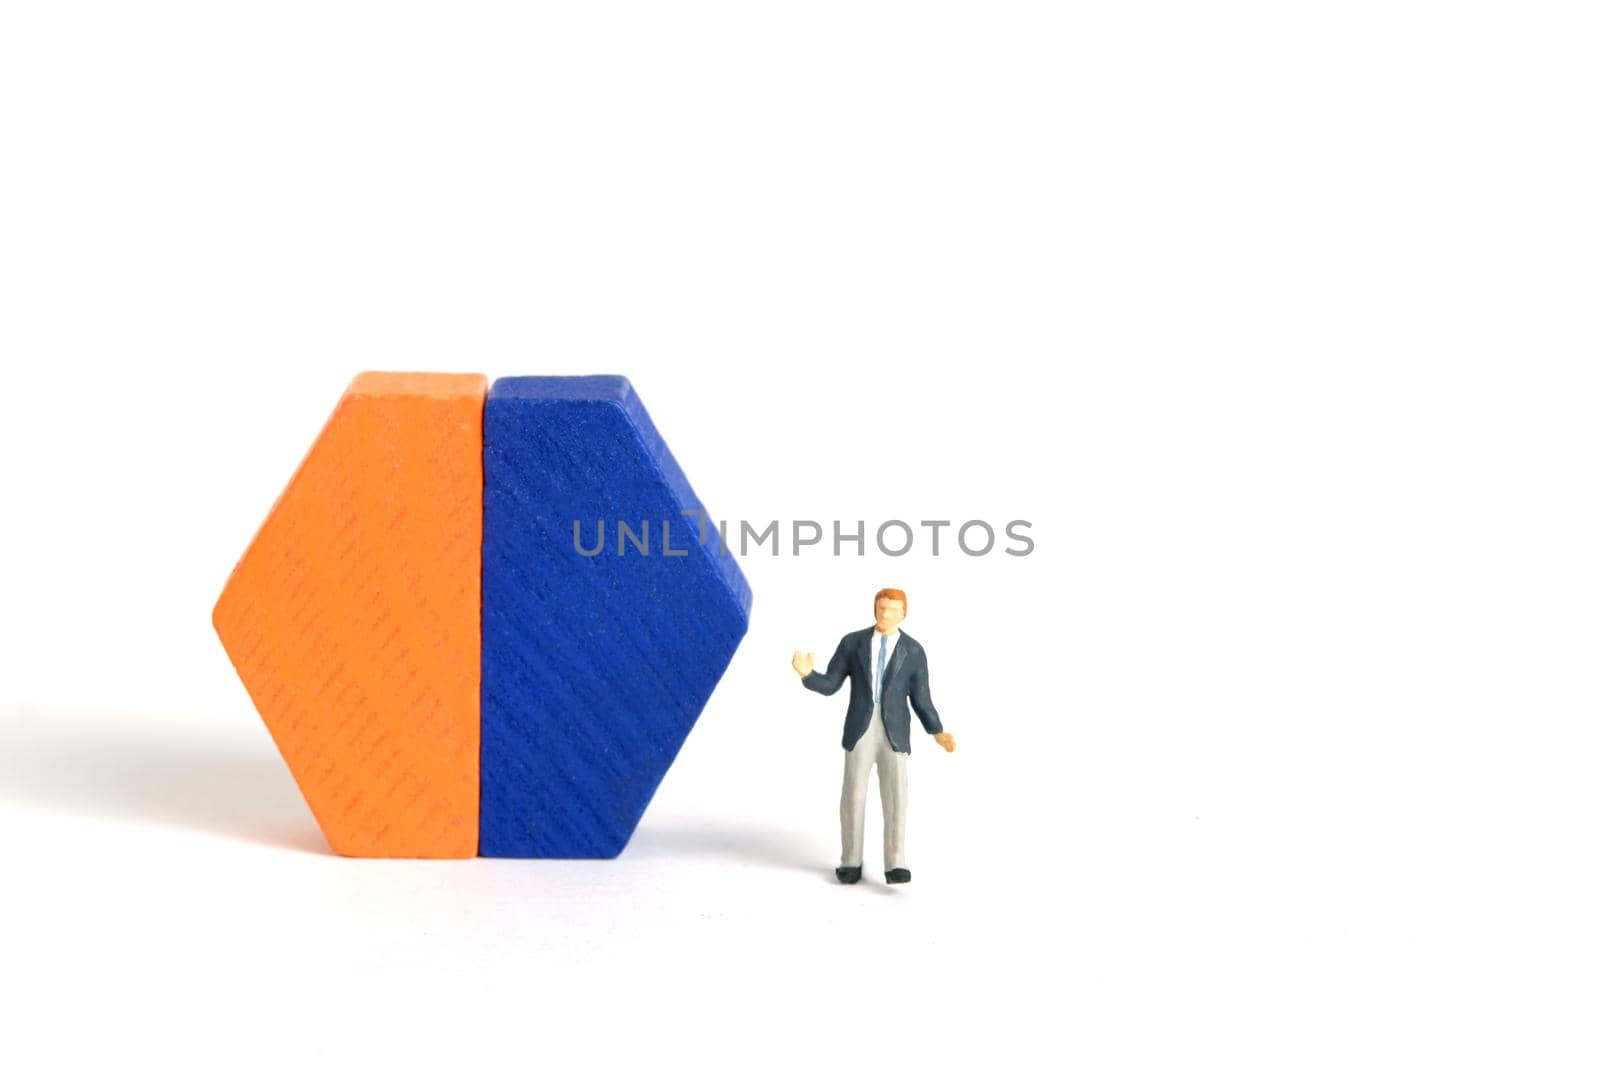 Miniature people toy figure photography. A shrugging businessman doing business presentation standing in front of wooden chart diagram. Isolated on white background. Image photo by Macrostud